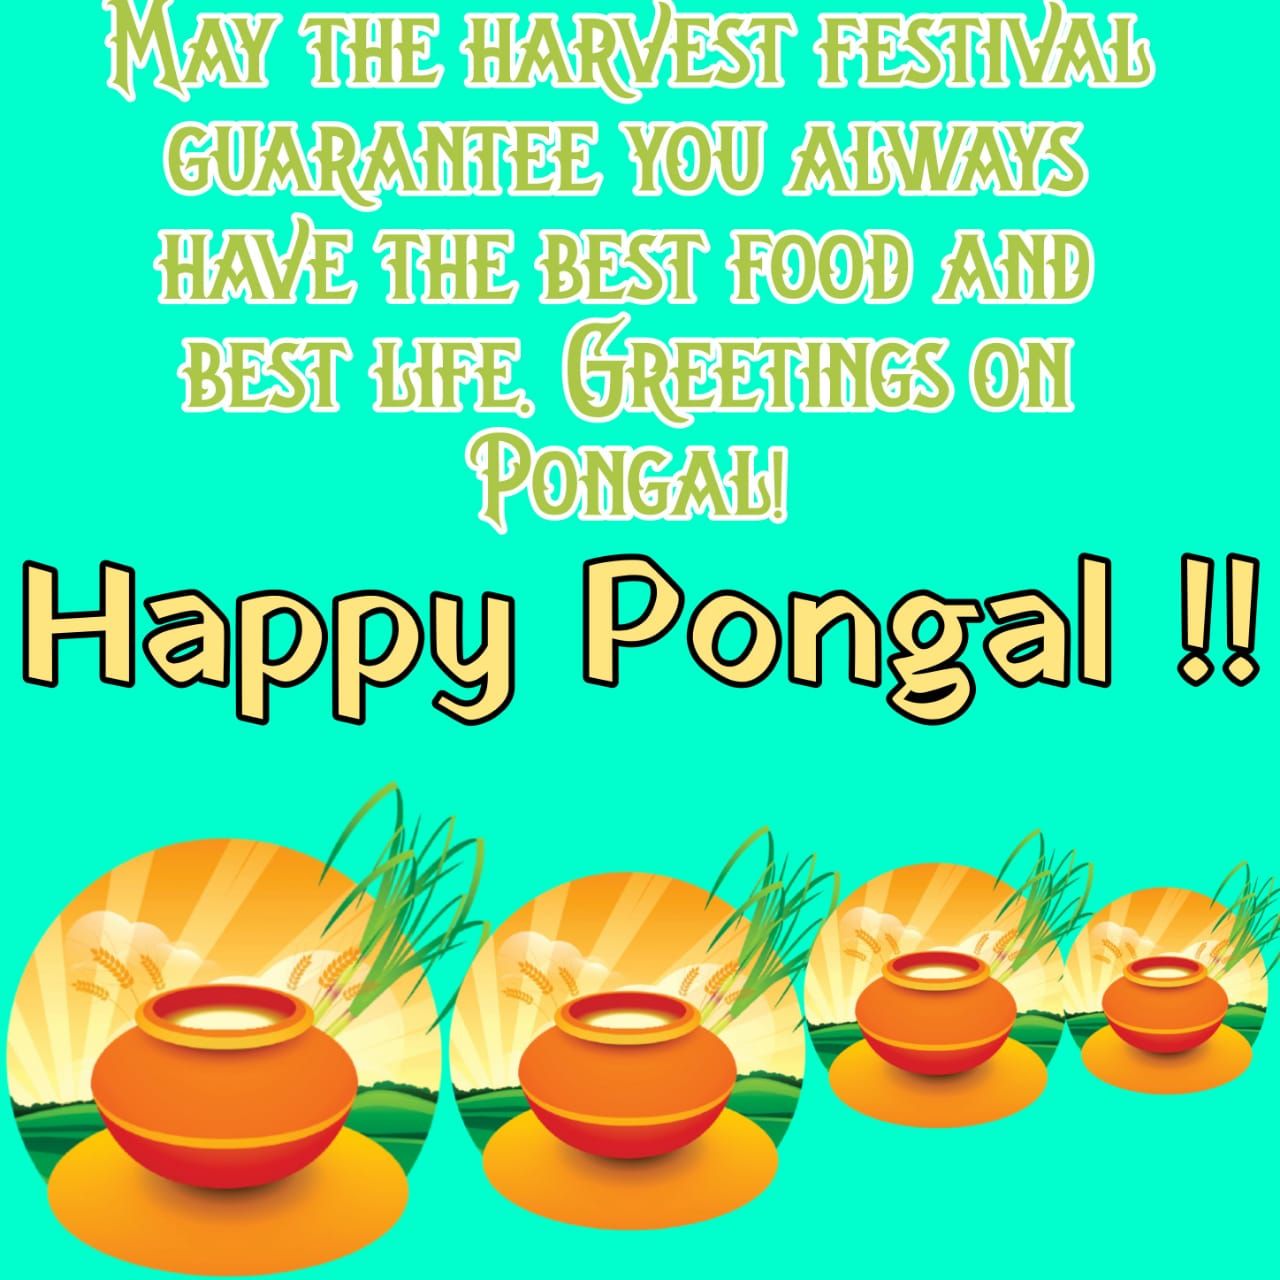 Happy Pongal image 2021, Image, Messages and quotes shared on your social media wishes image